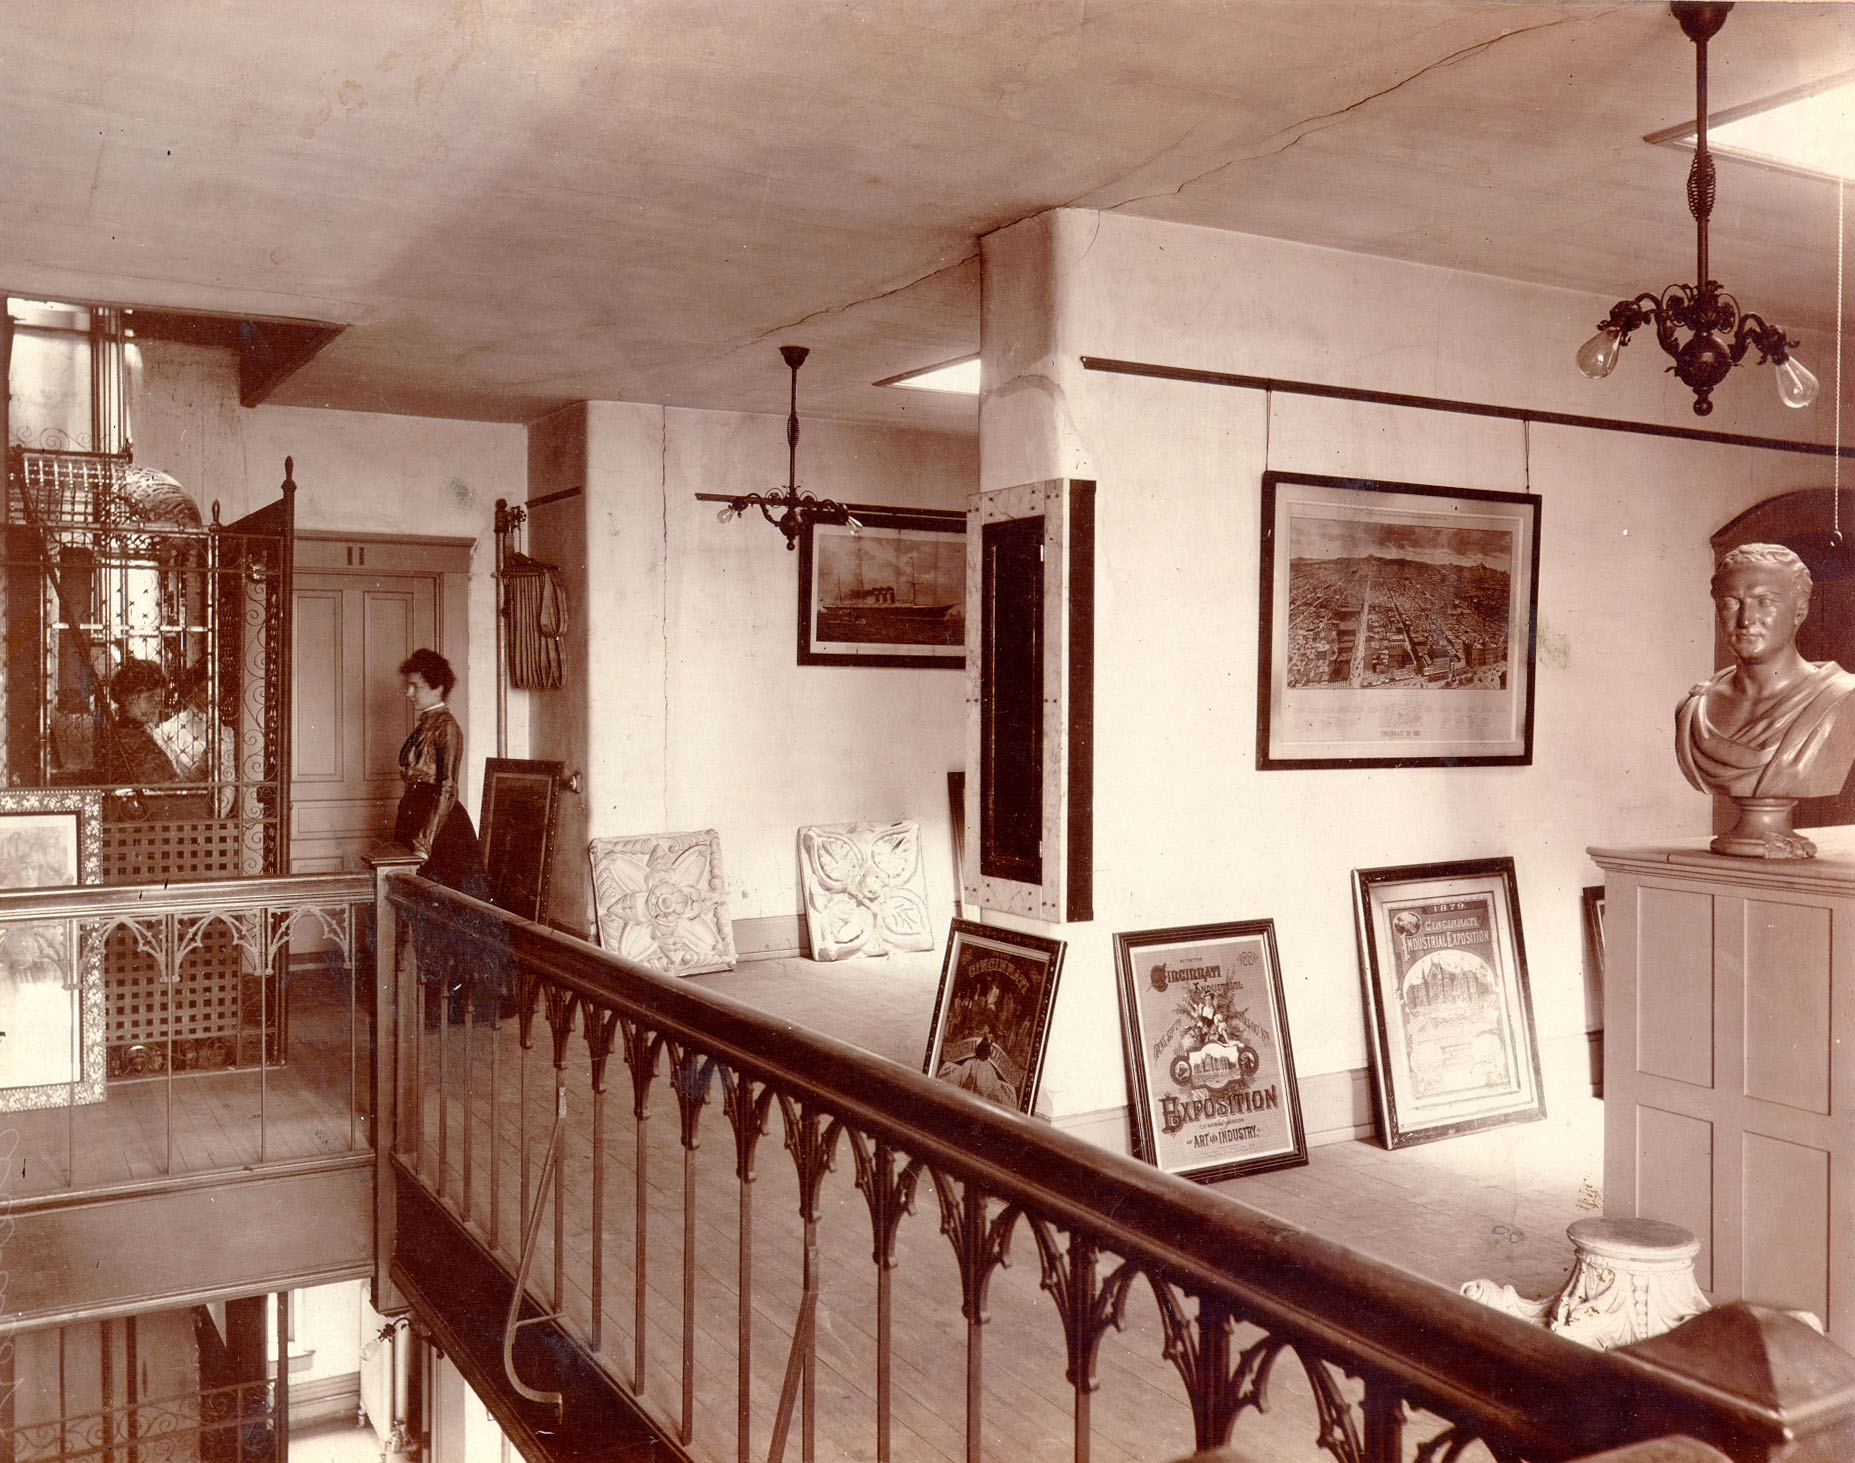 Interior of Greenwood Hall, showing posters on walls